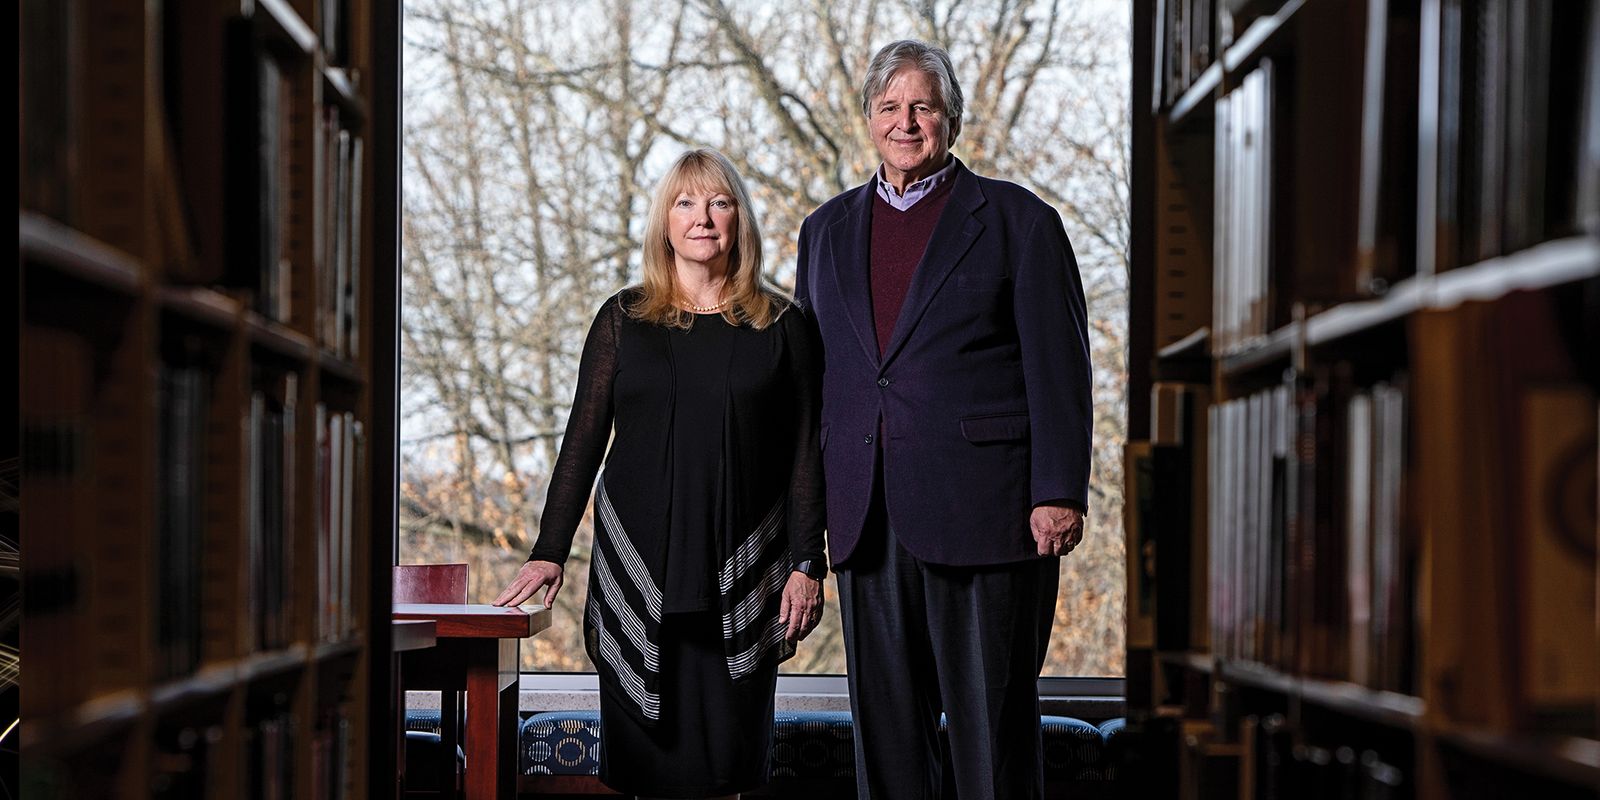 Suzanne Weise and Pat McGinley stand in the law library at WVU.